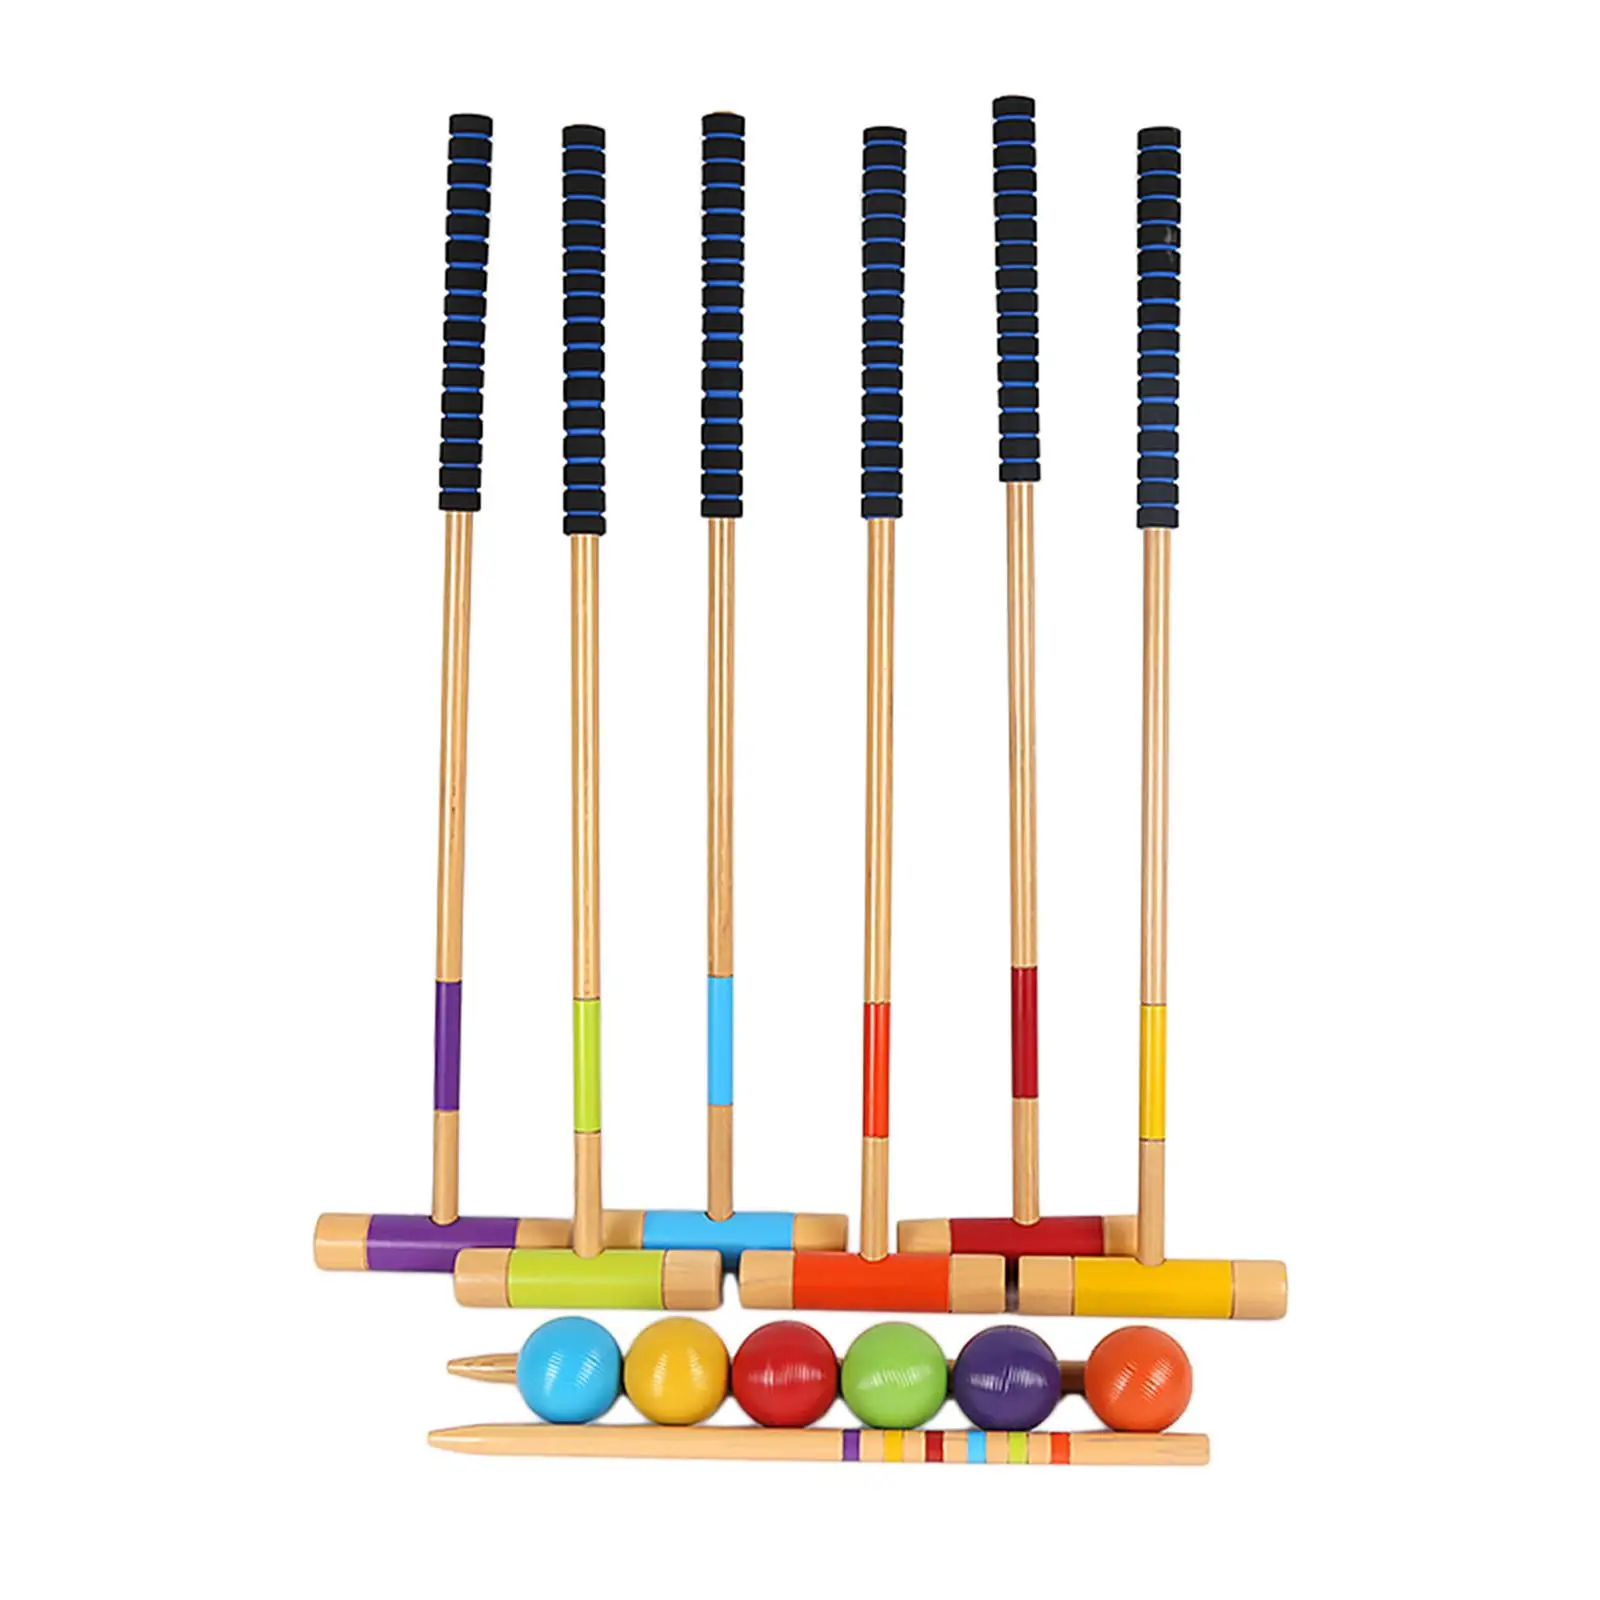 6Pcs 1 Set for 6 Players Colored Balls Carrying Bag with Wooden Mallets Diameter 7.5cm Croquet for Lawn Outdoor Toys Backyard